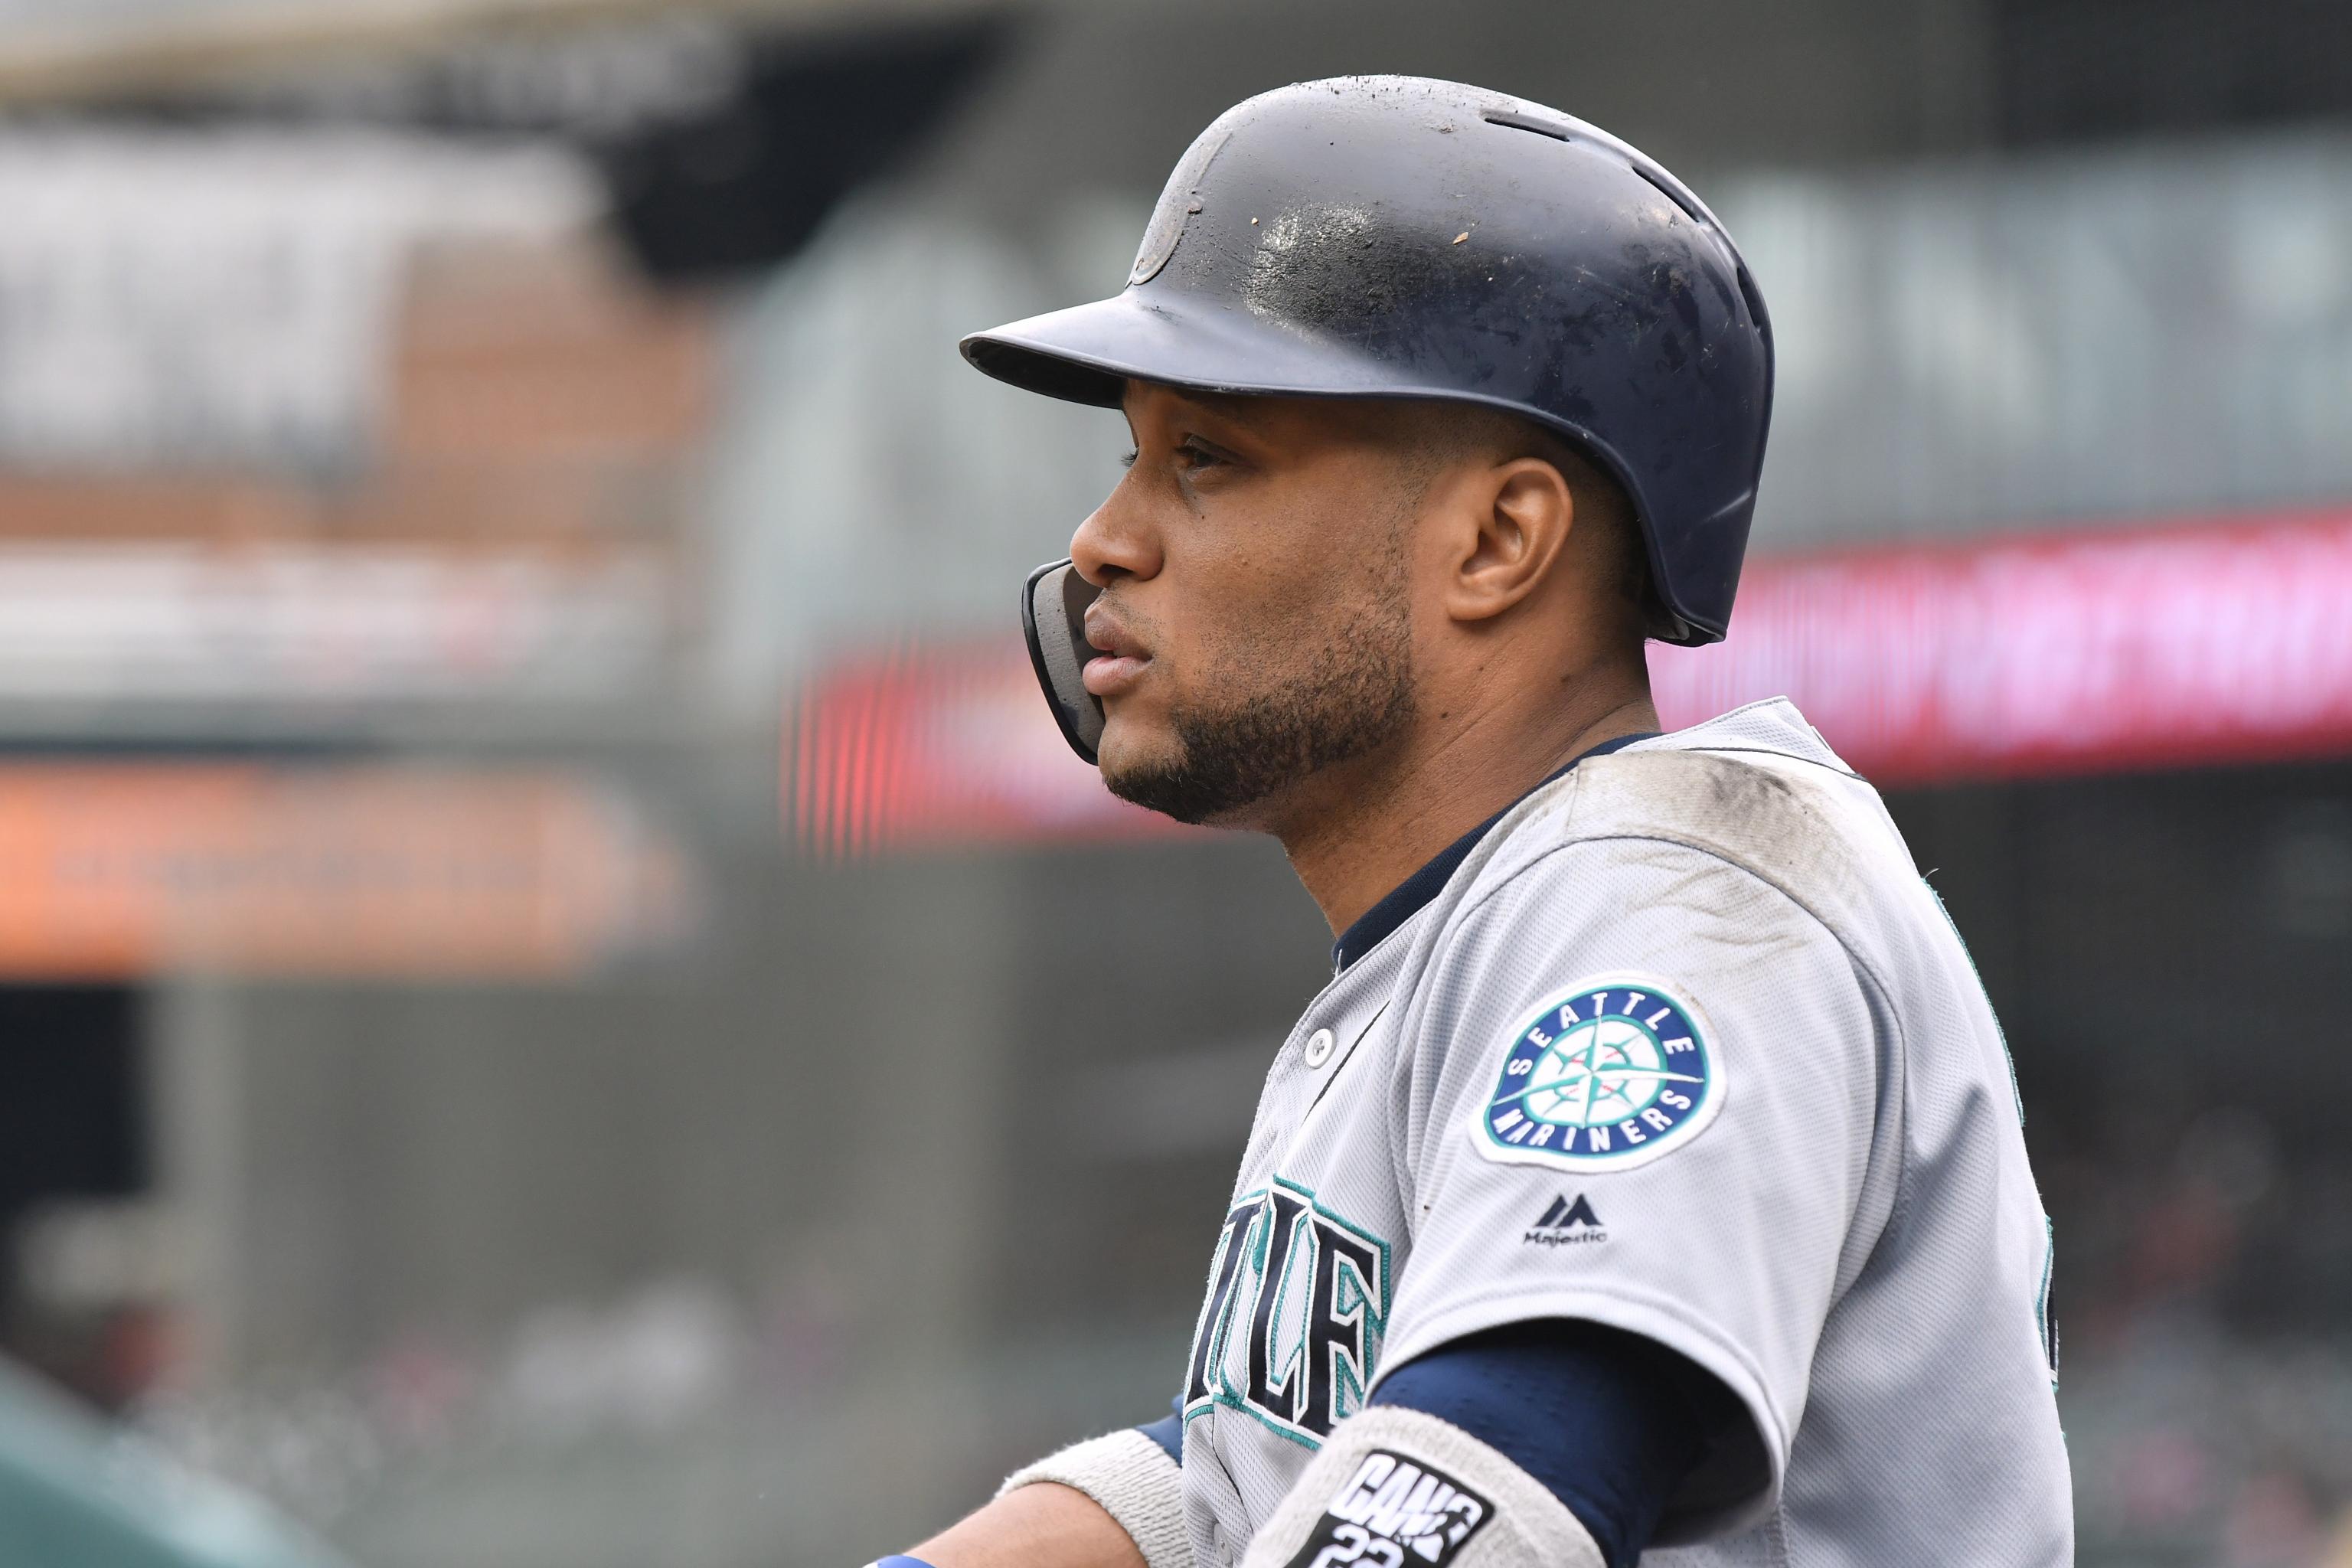 Yankees meet with Robinson Cano's agent; still big gap in contract